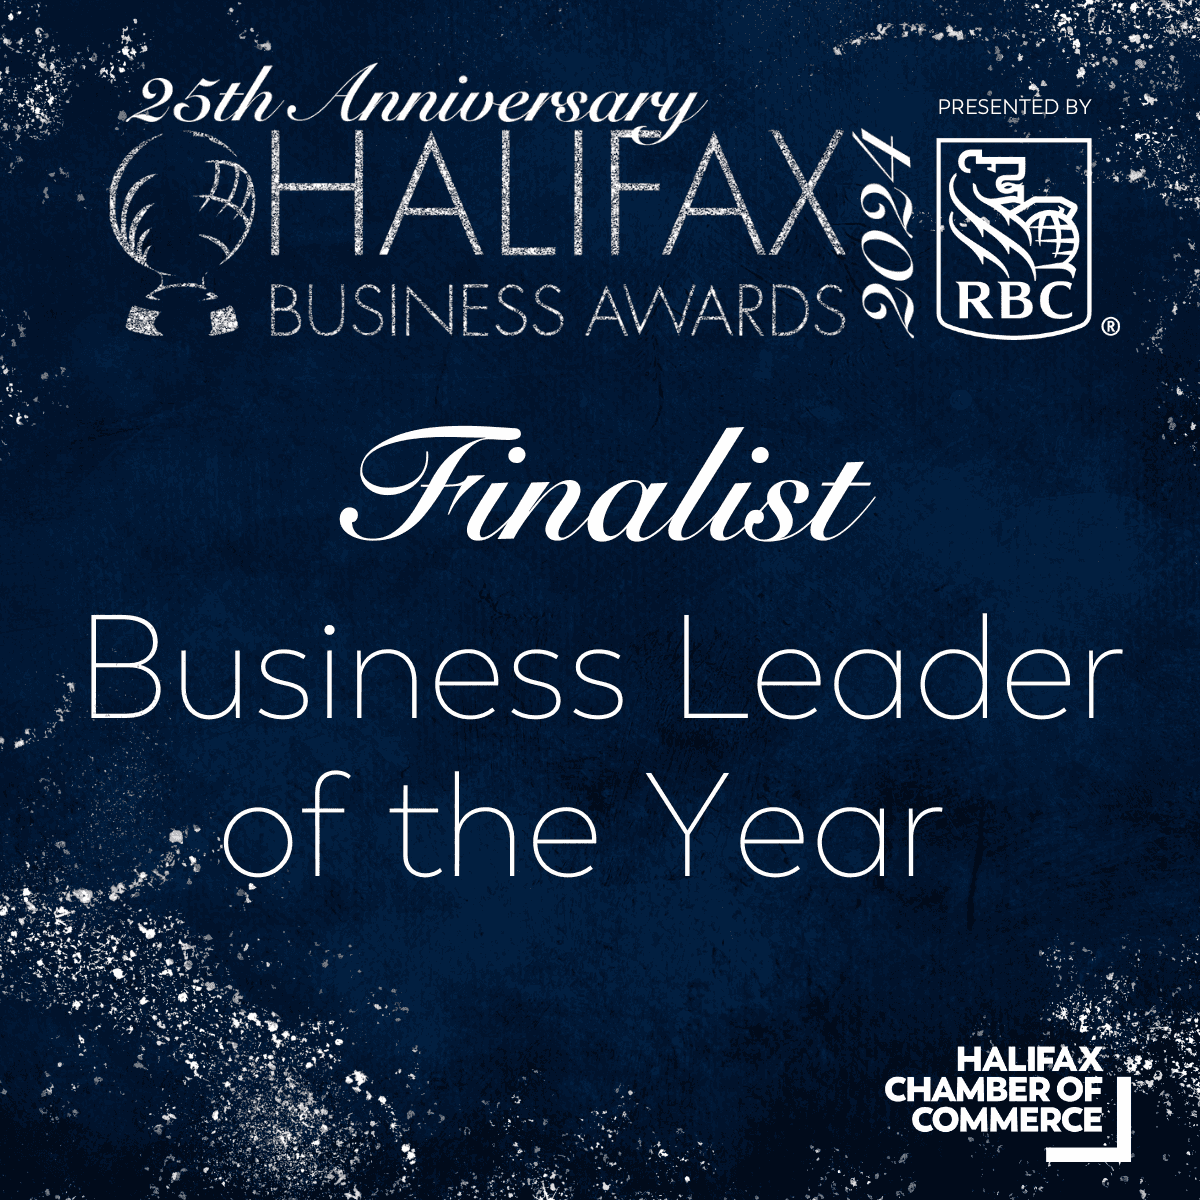 Our CEO is a finalist for the Business Leader of the Year